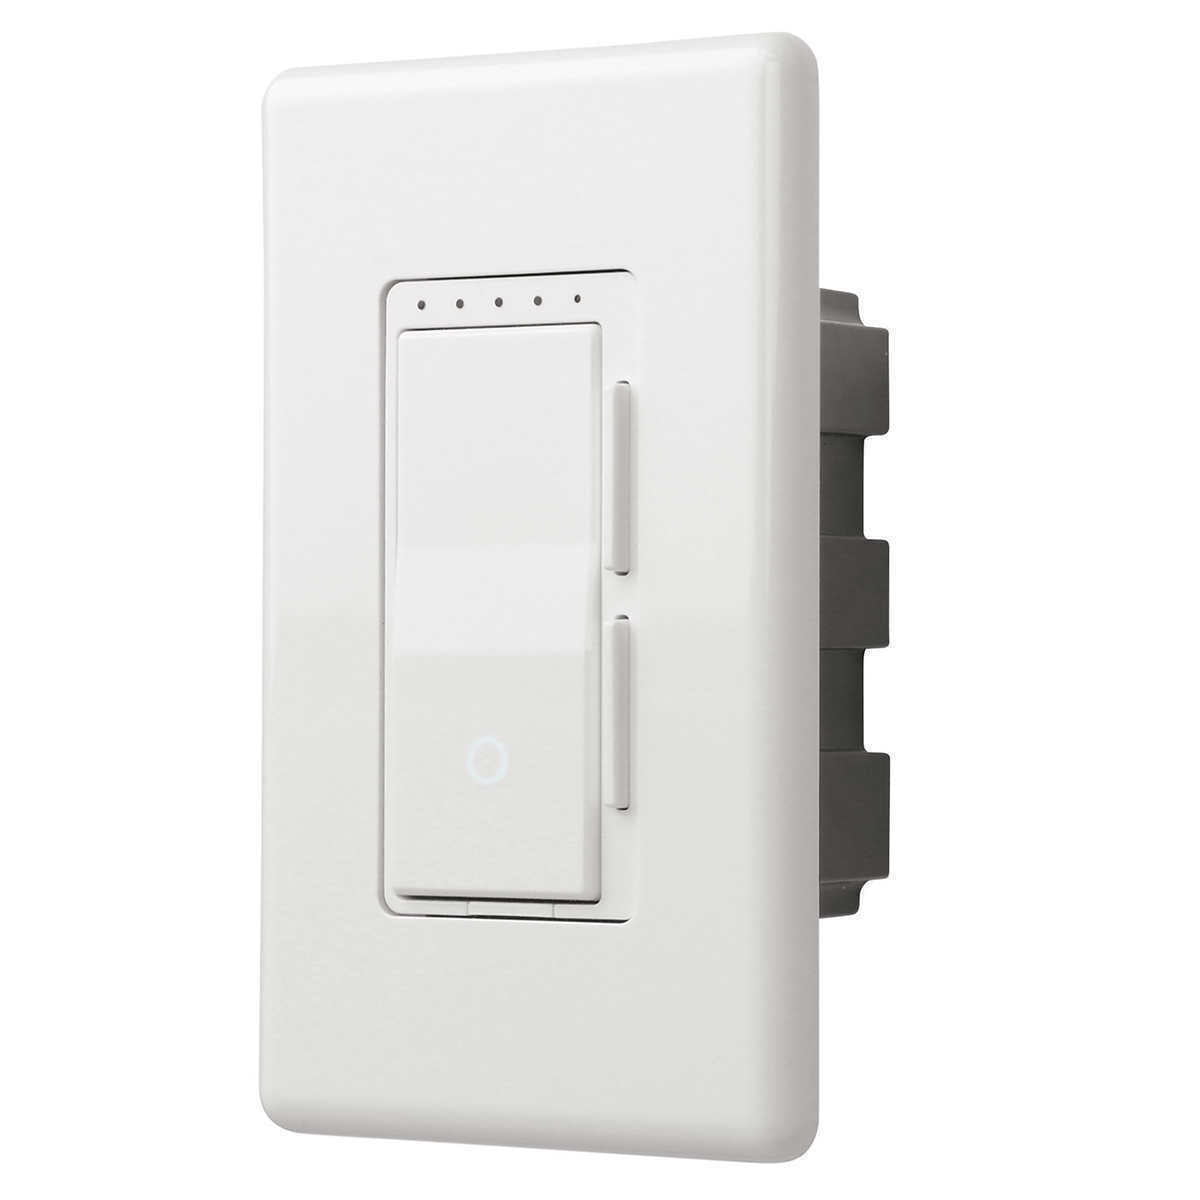 NEW Feit Electric Wi-Fi Smart Dimmer 2-pack FREE SHIPPING 